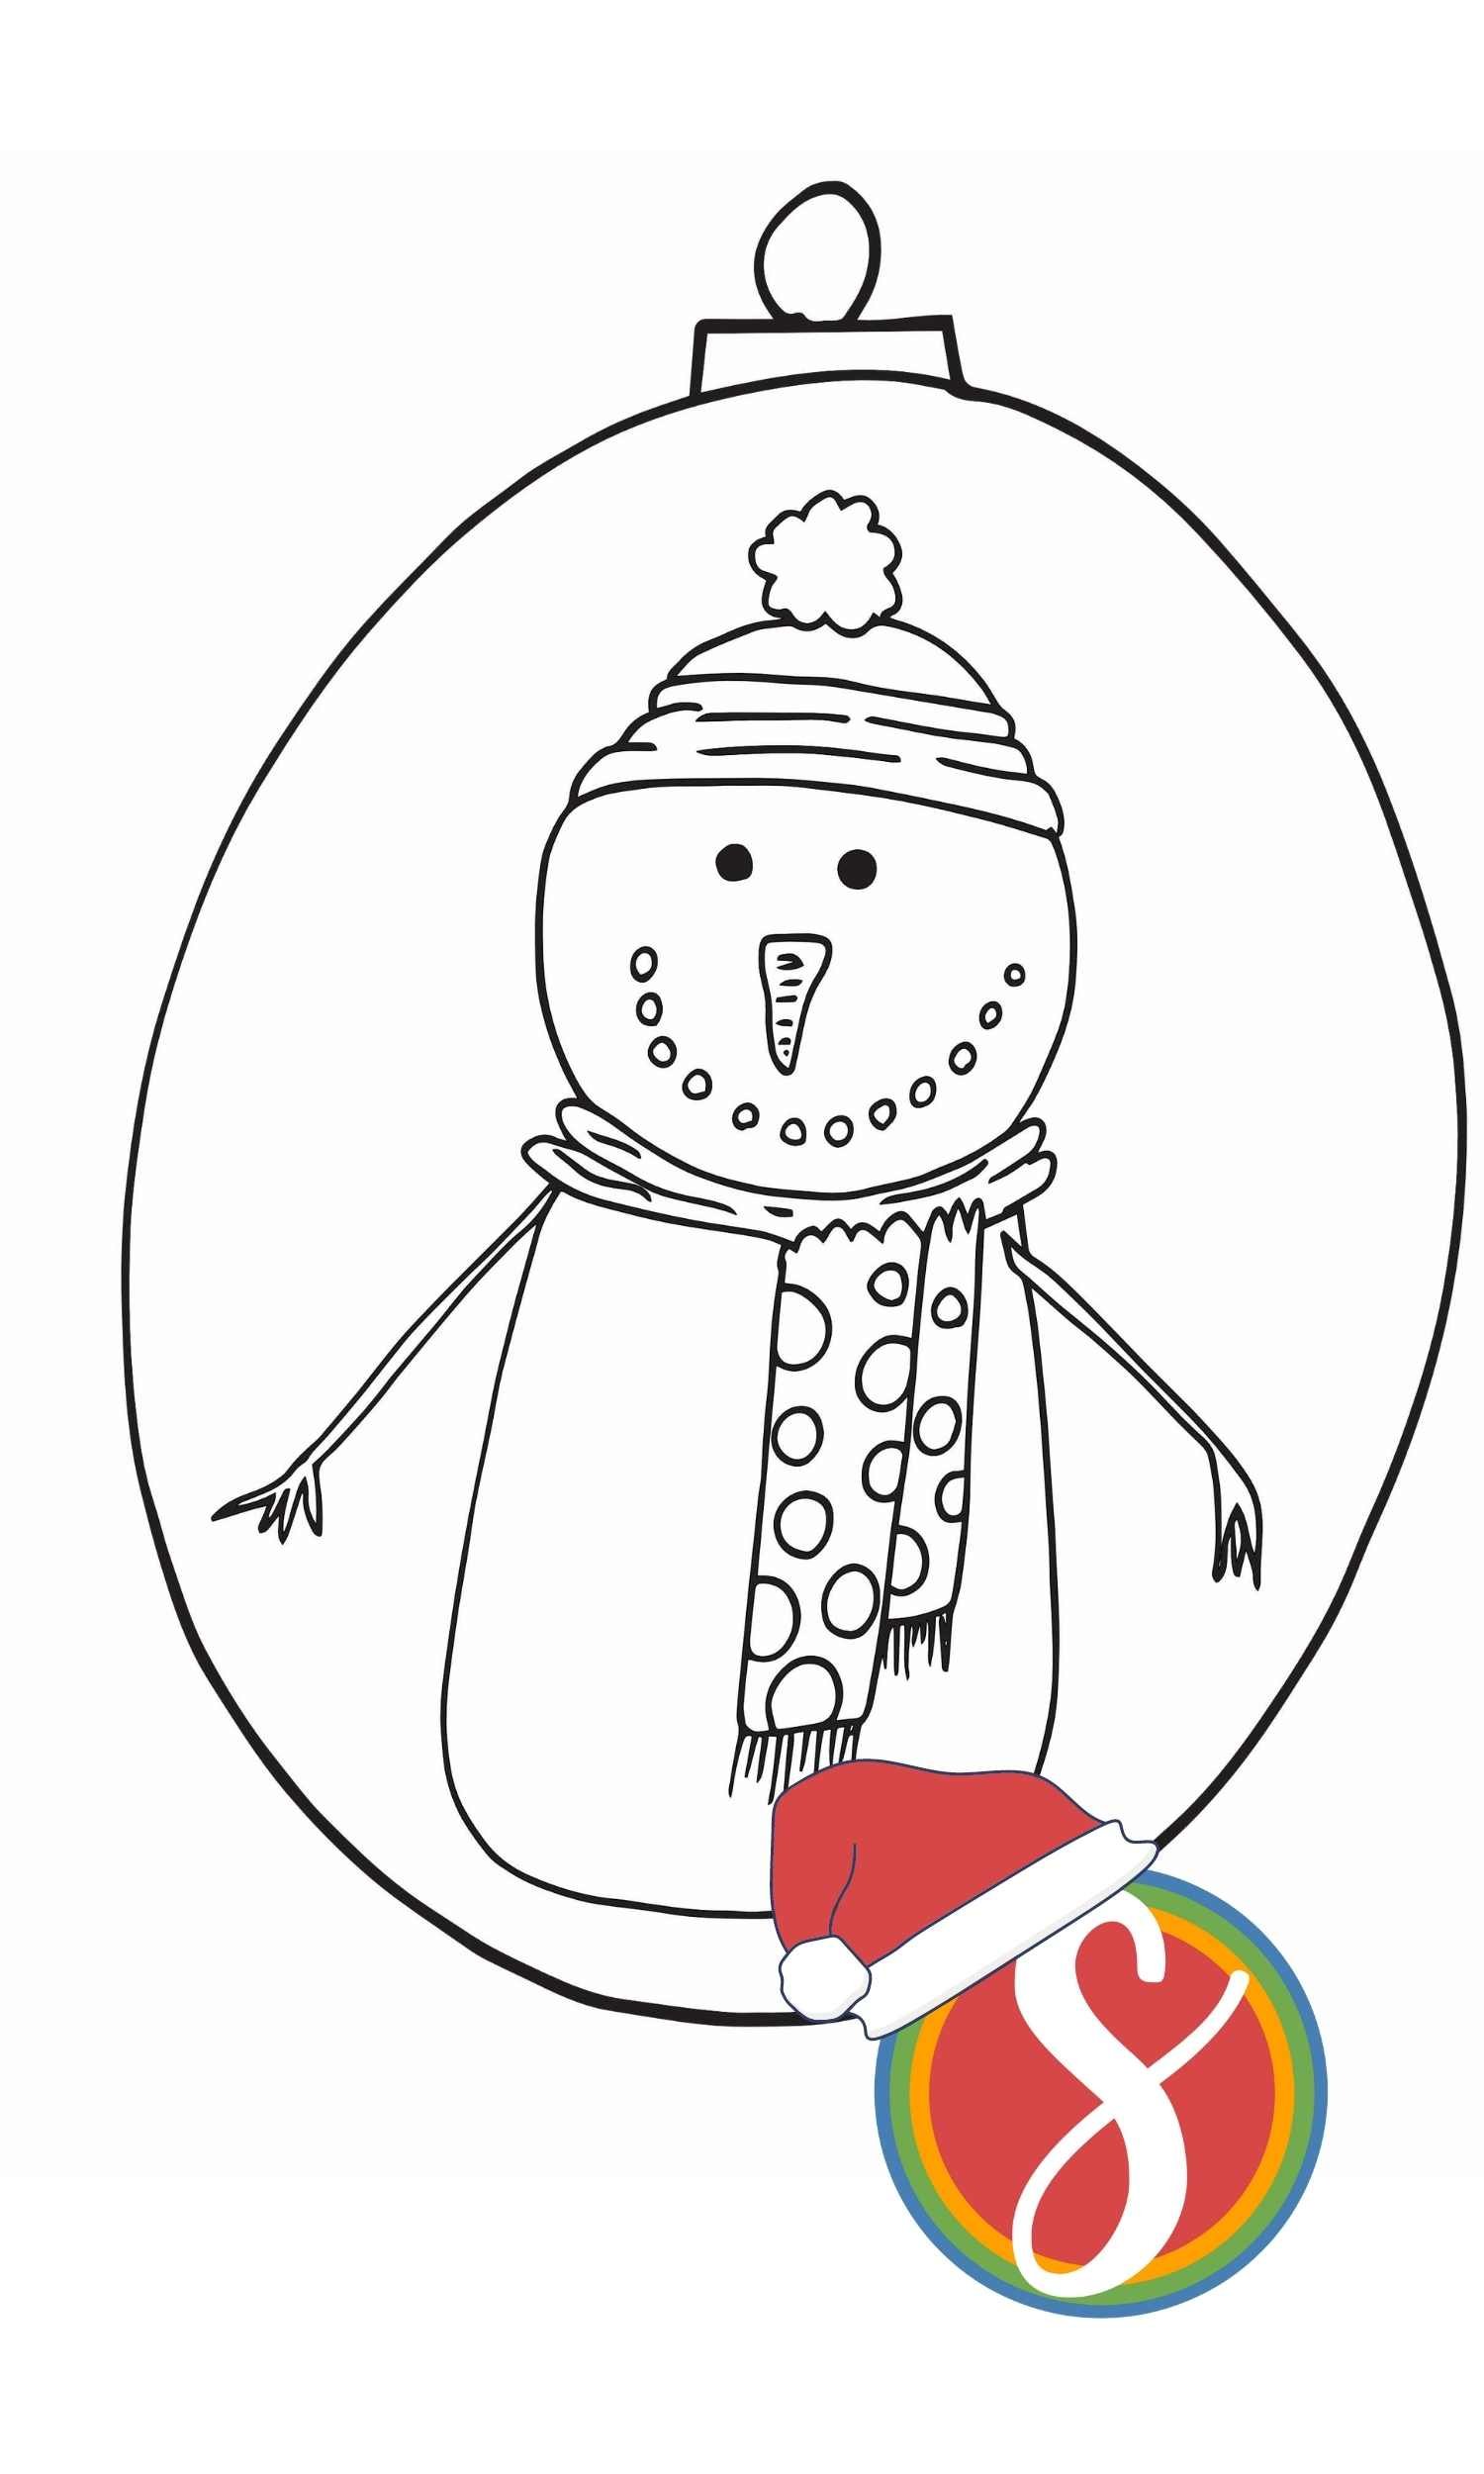 large ornament with a snowman inside to color